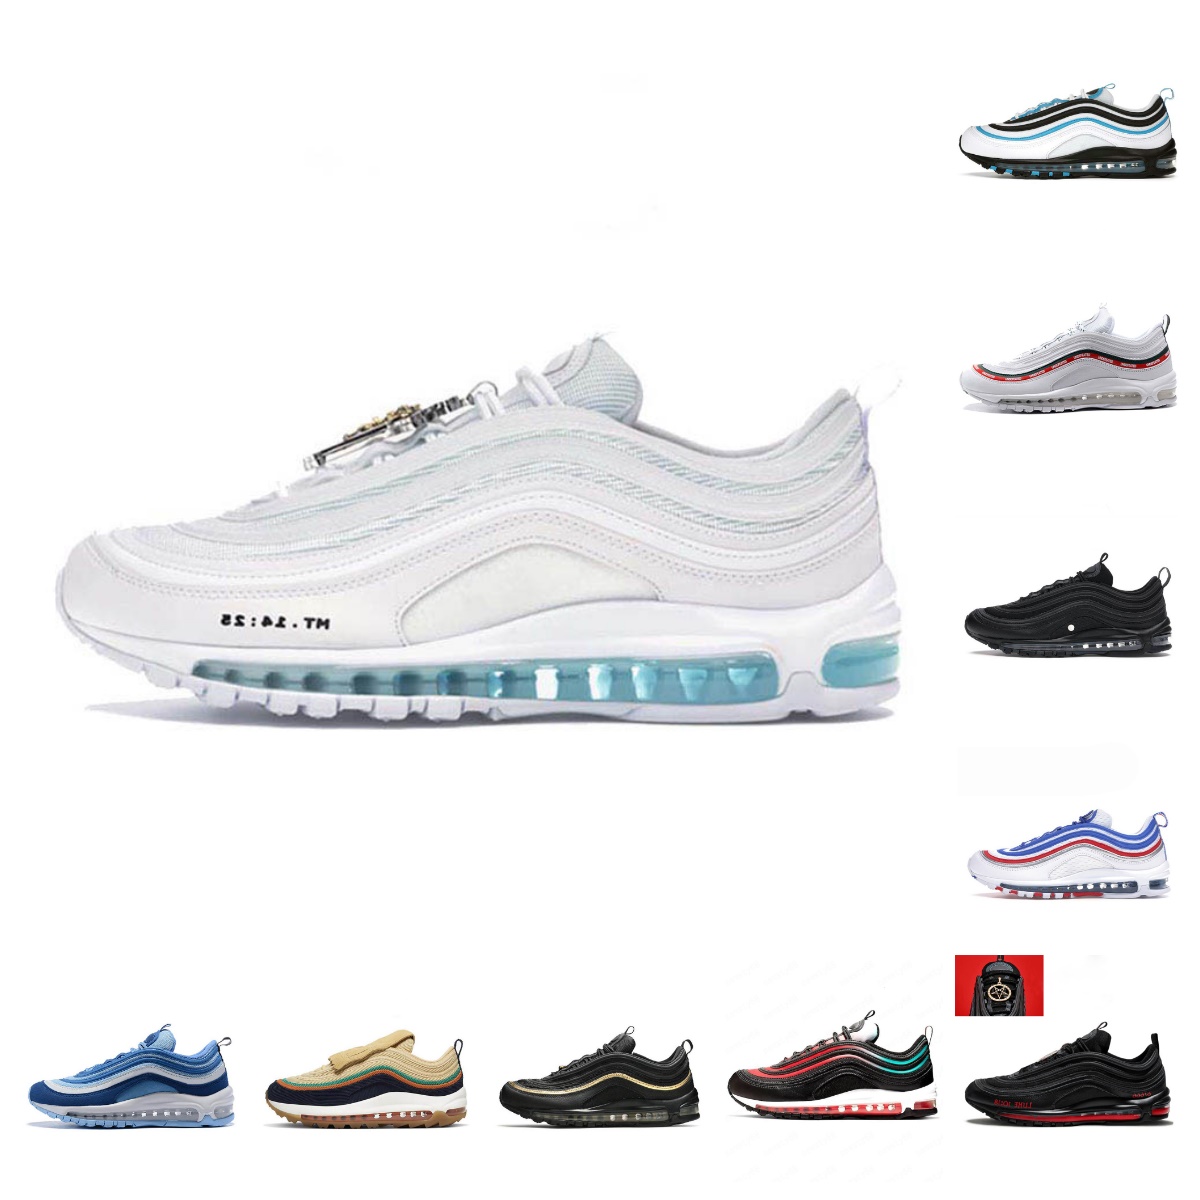 

Max 97 MSCHF x INRI Jesus Casual Shoes Air 97s Sean Wotherspoon Triple White Black Silver Bullet Pine Green Bred Volt Reflective Sail outdoor Men Women Sports Sneakers, Bubble package bag